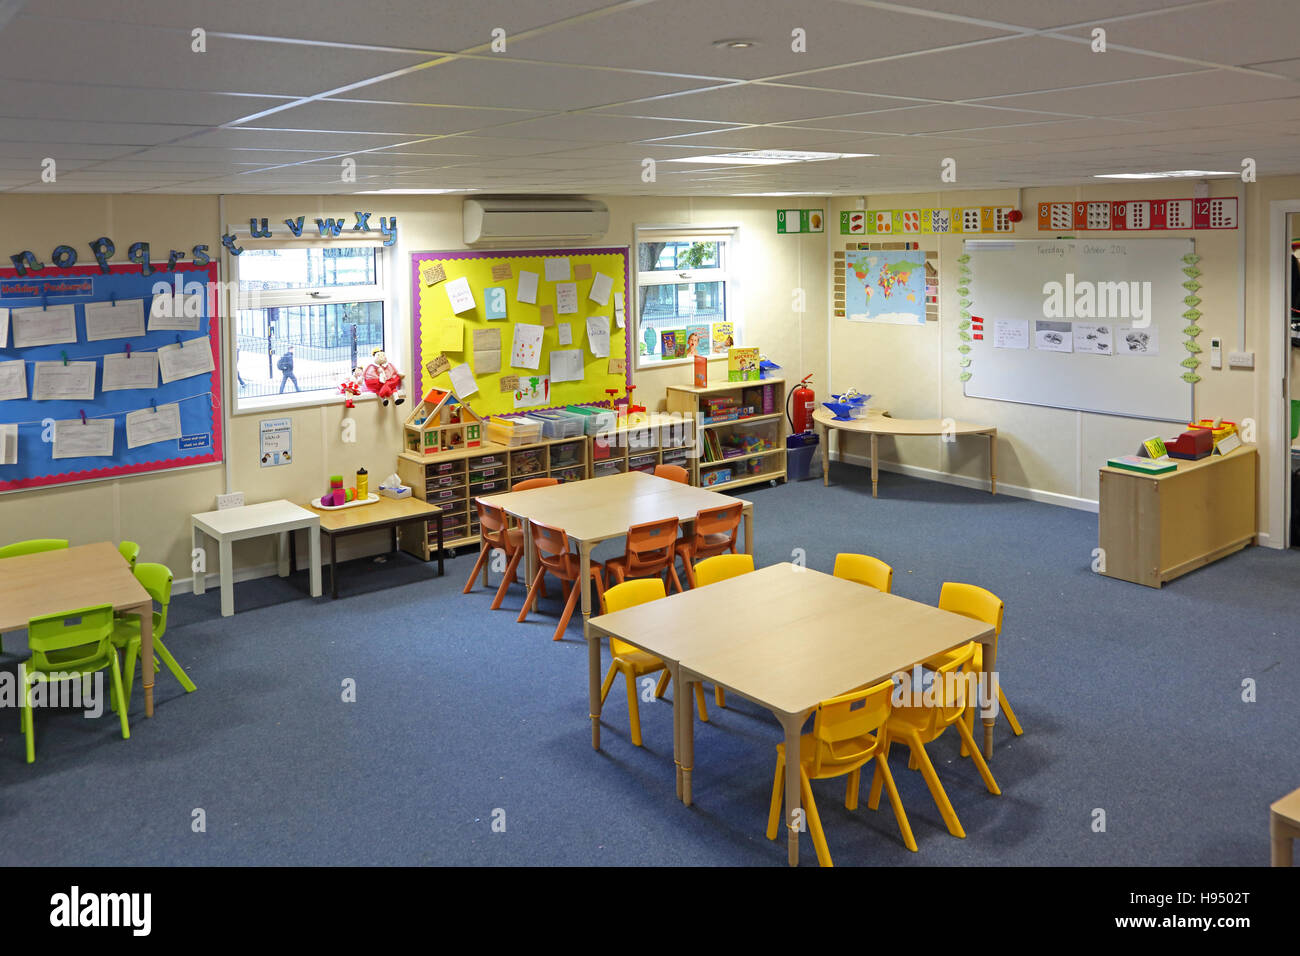 Brightly coloured interior of a modern year 1 school classroom showing tables, chairs shelves and artwork on walls Stock Photo